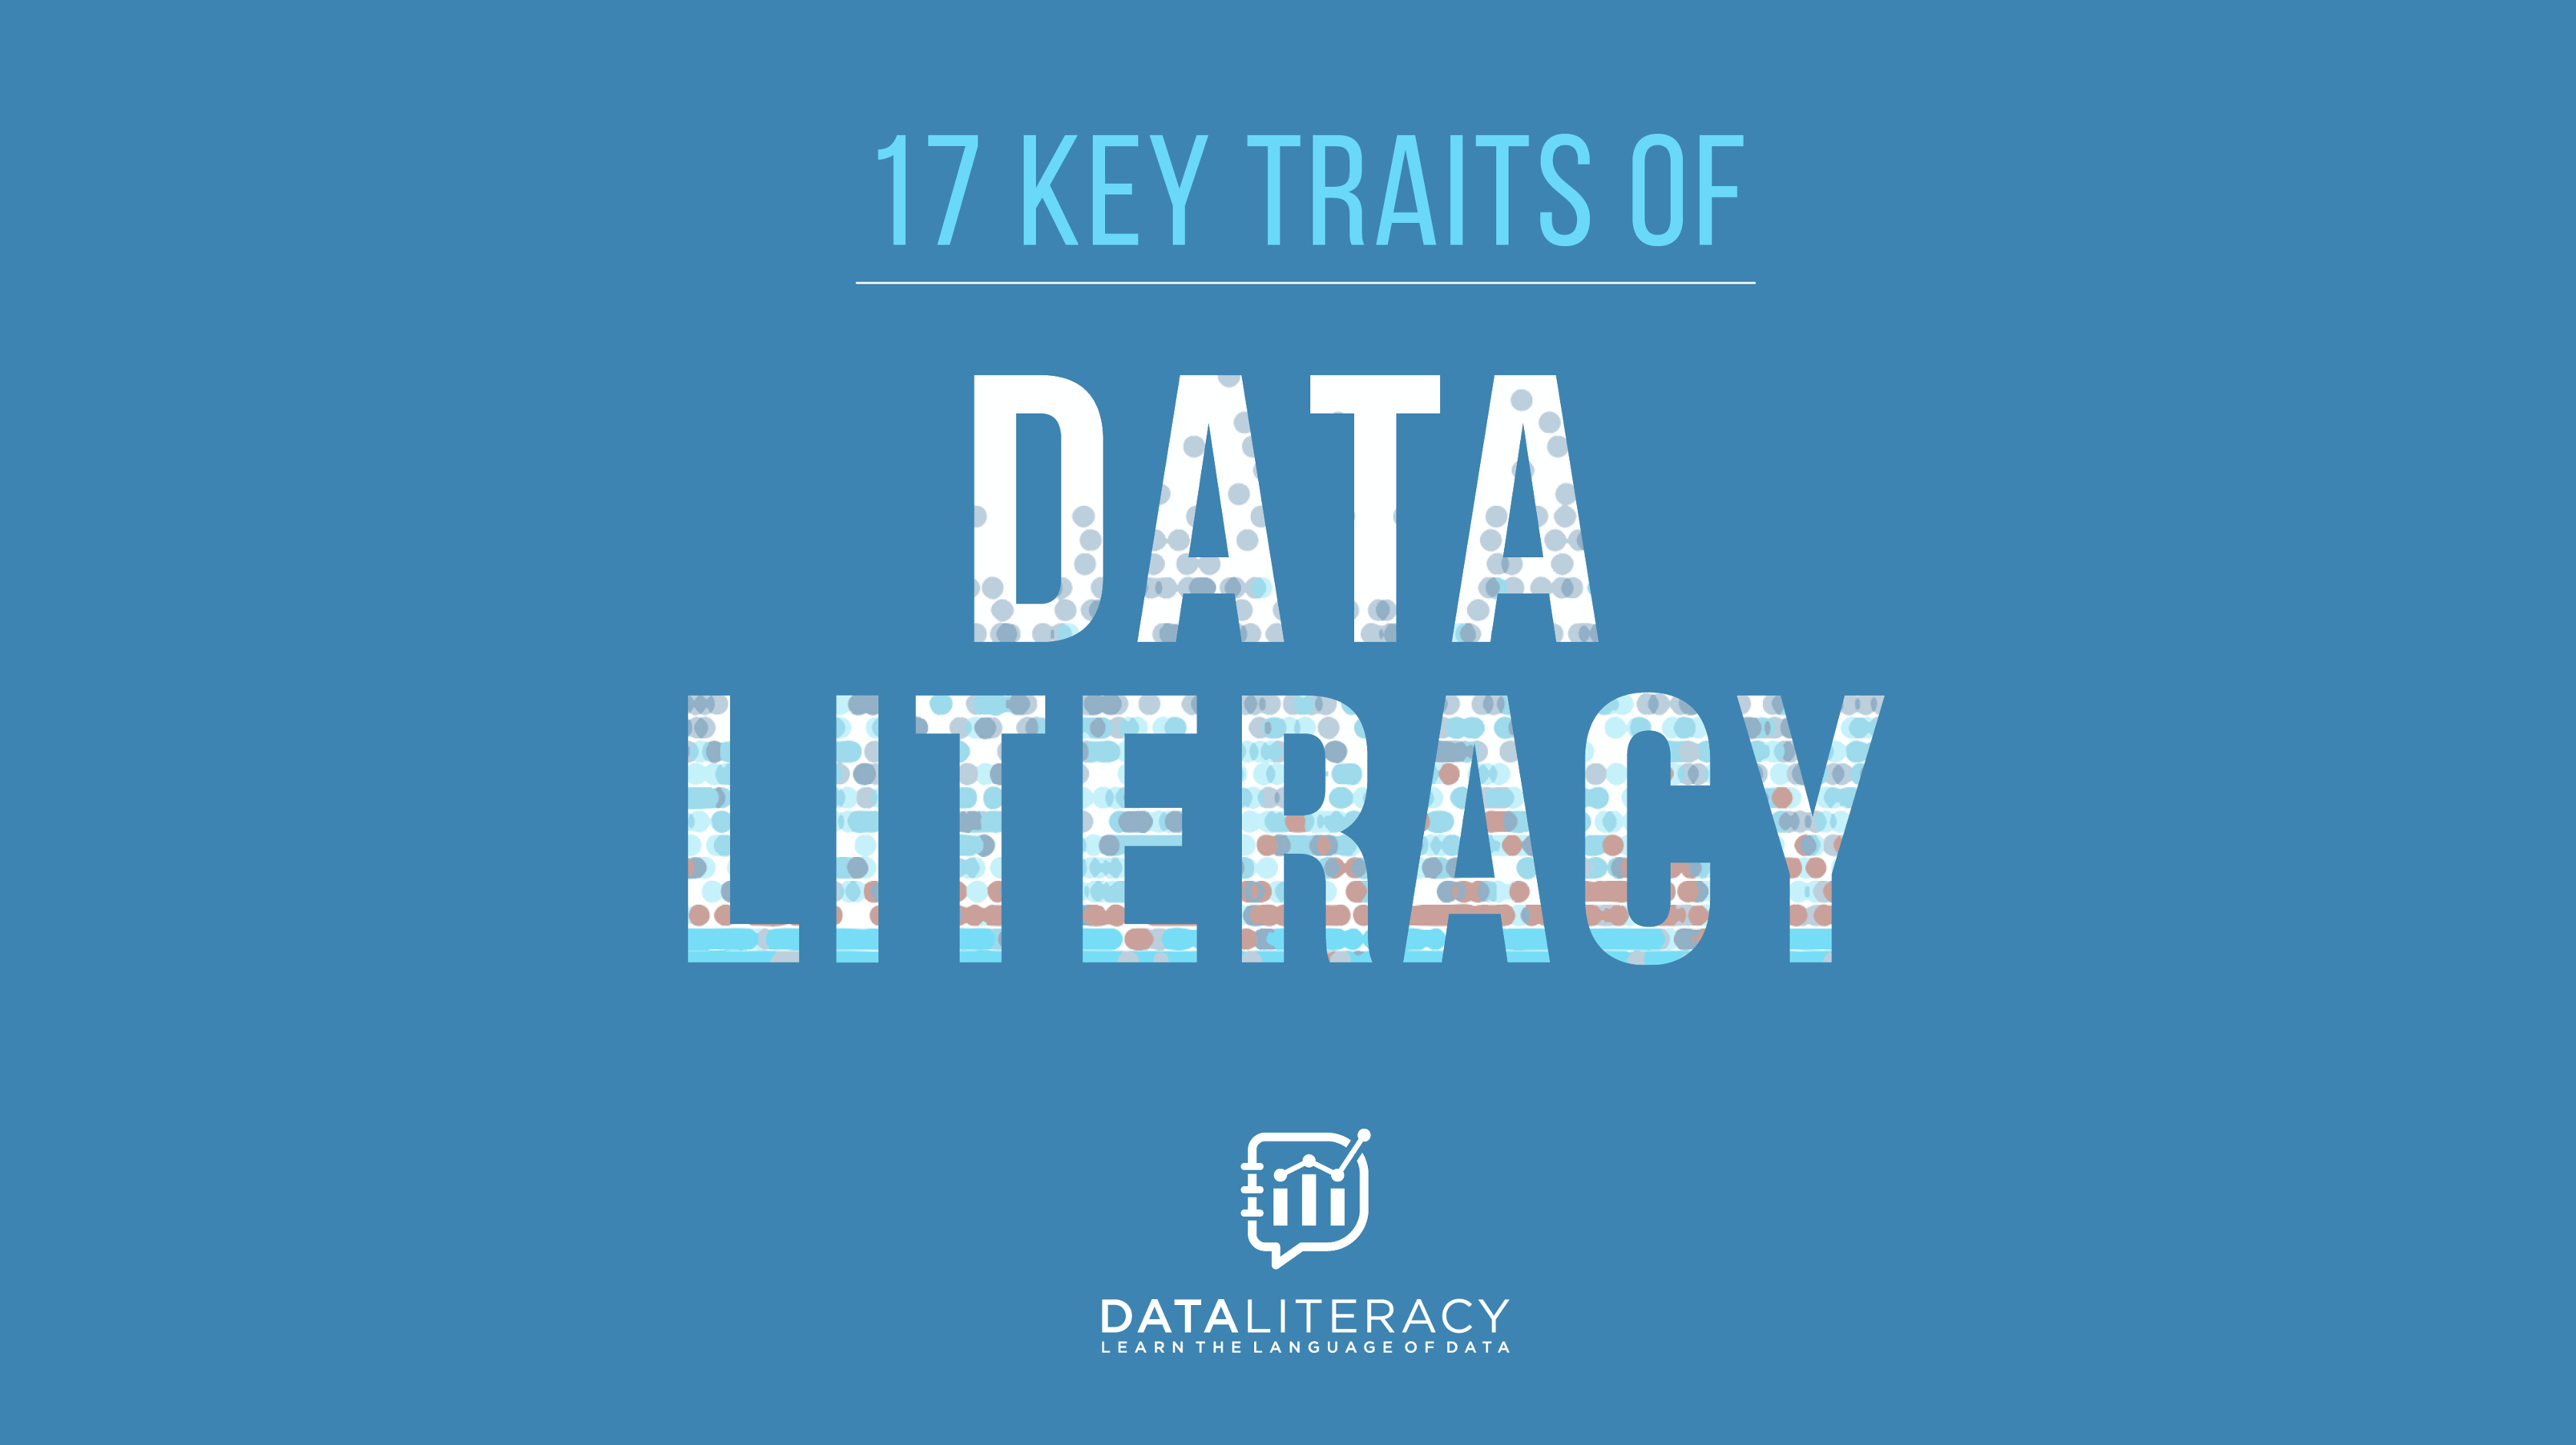 Thanks for Purchasing the 17 Key Traits of Data Literacy On-Demand Course | Data Literacy  